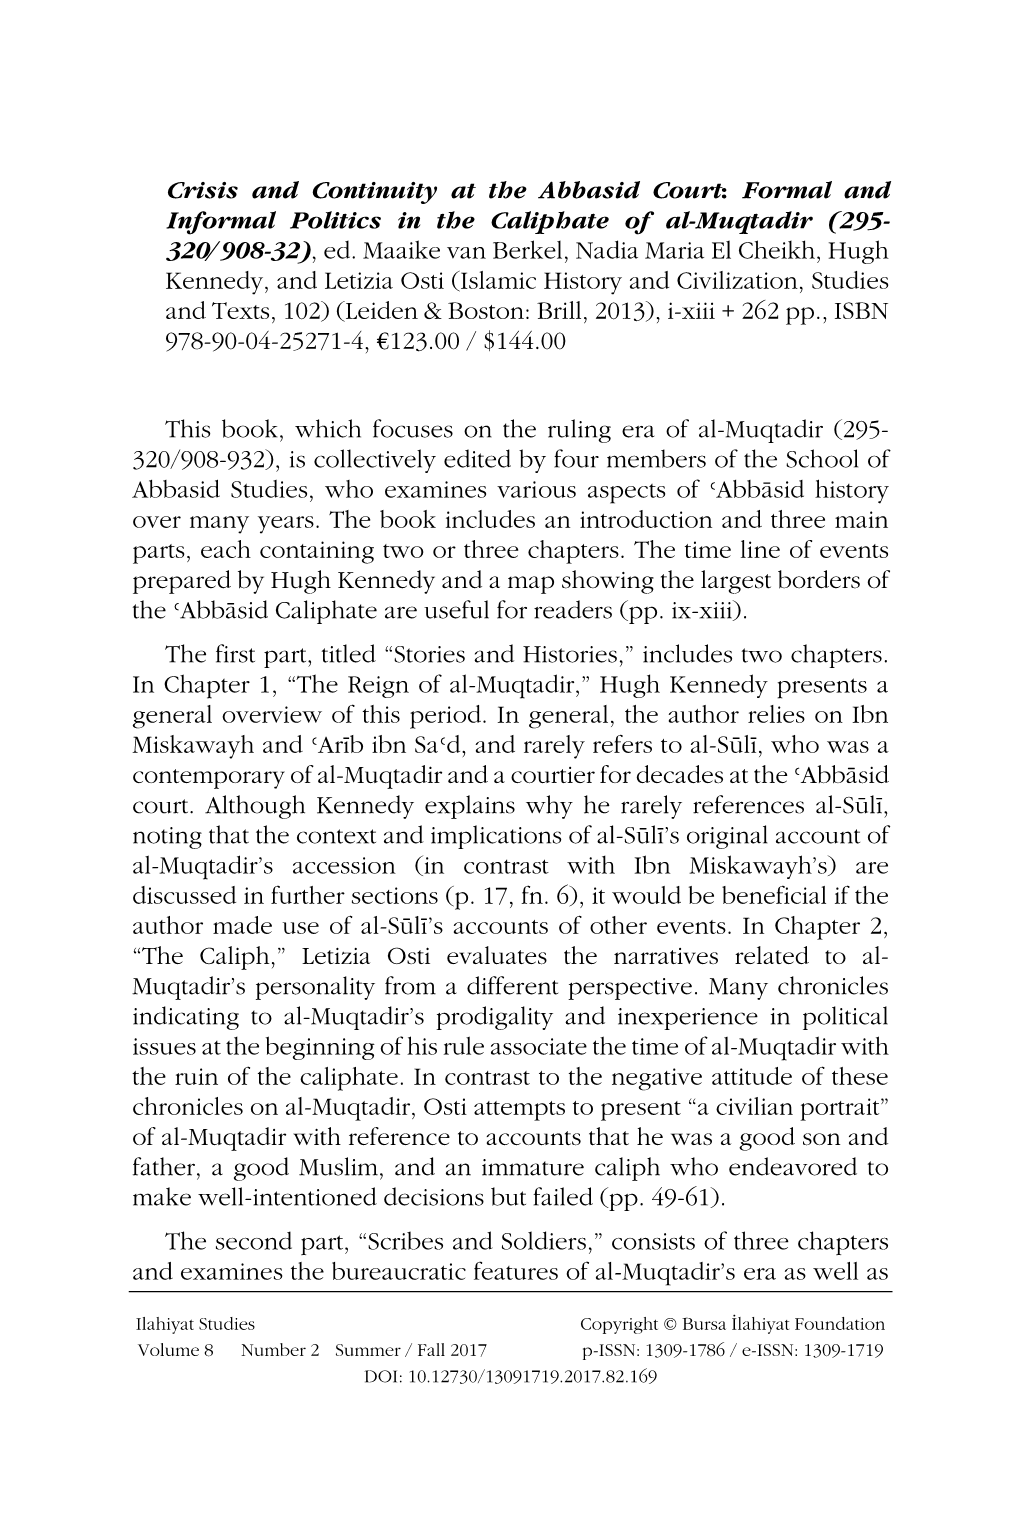 Formal and Informal Politics in the Caliphate of Al-Muqtadir (295- 320/908-32), Ed